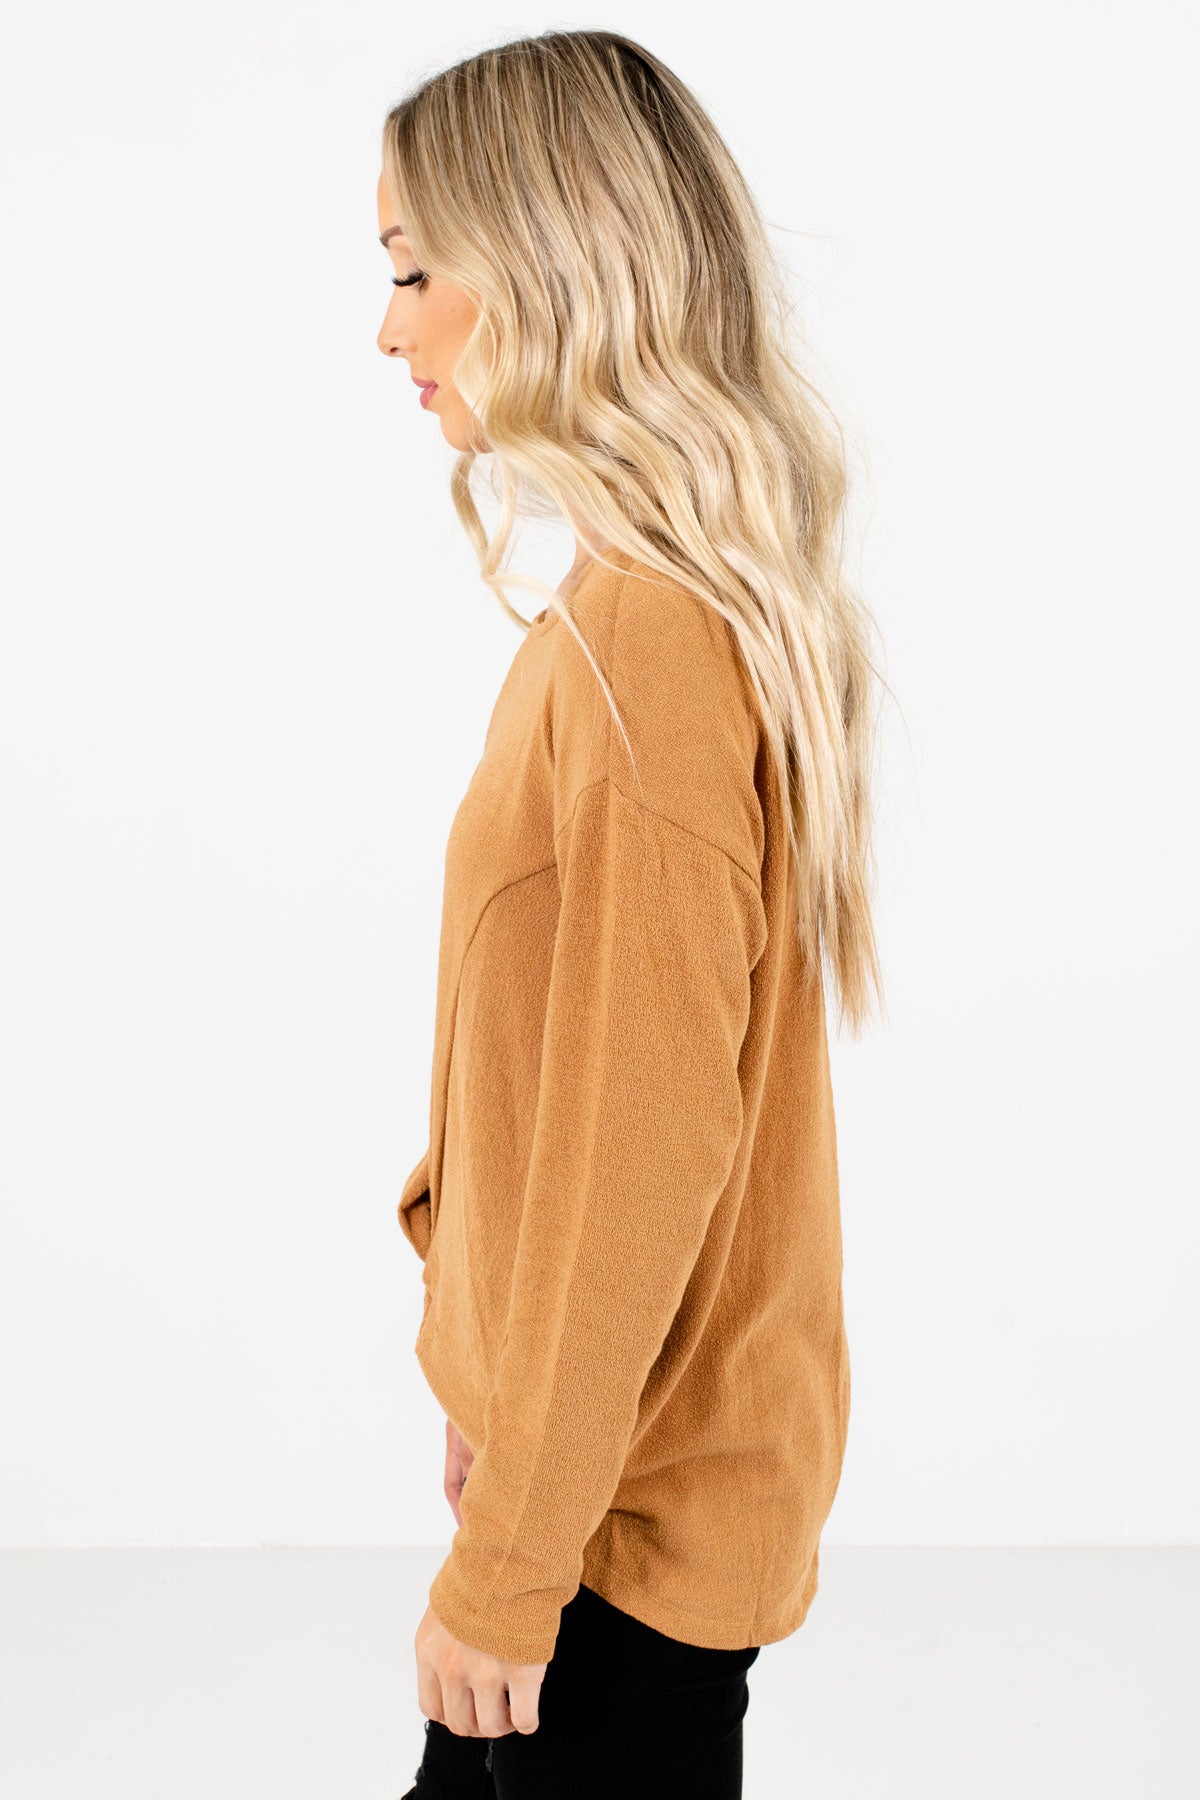 Mustard Long Sleeve Boutique Tops for Women